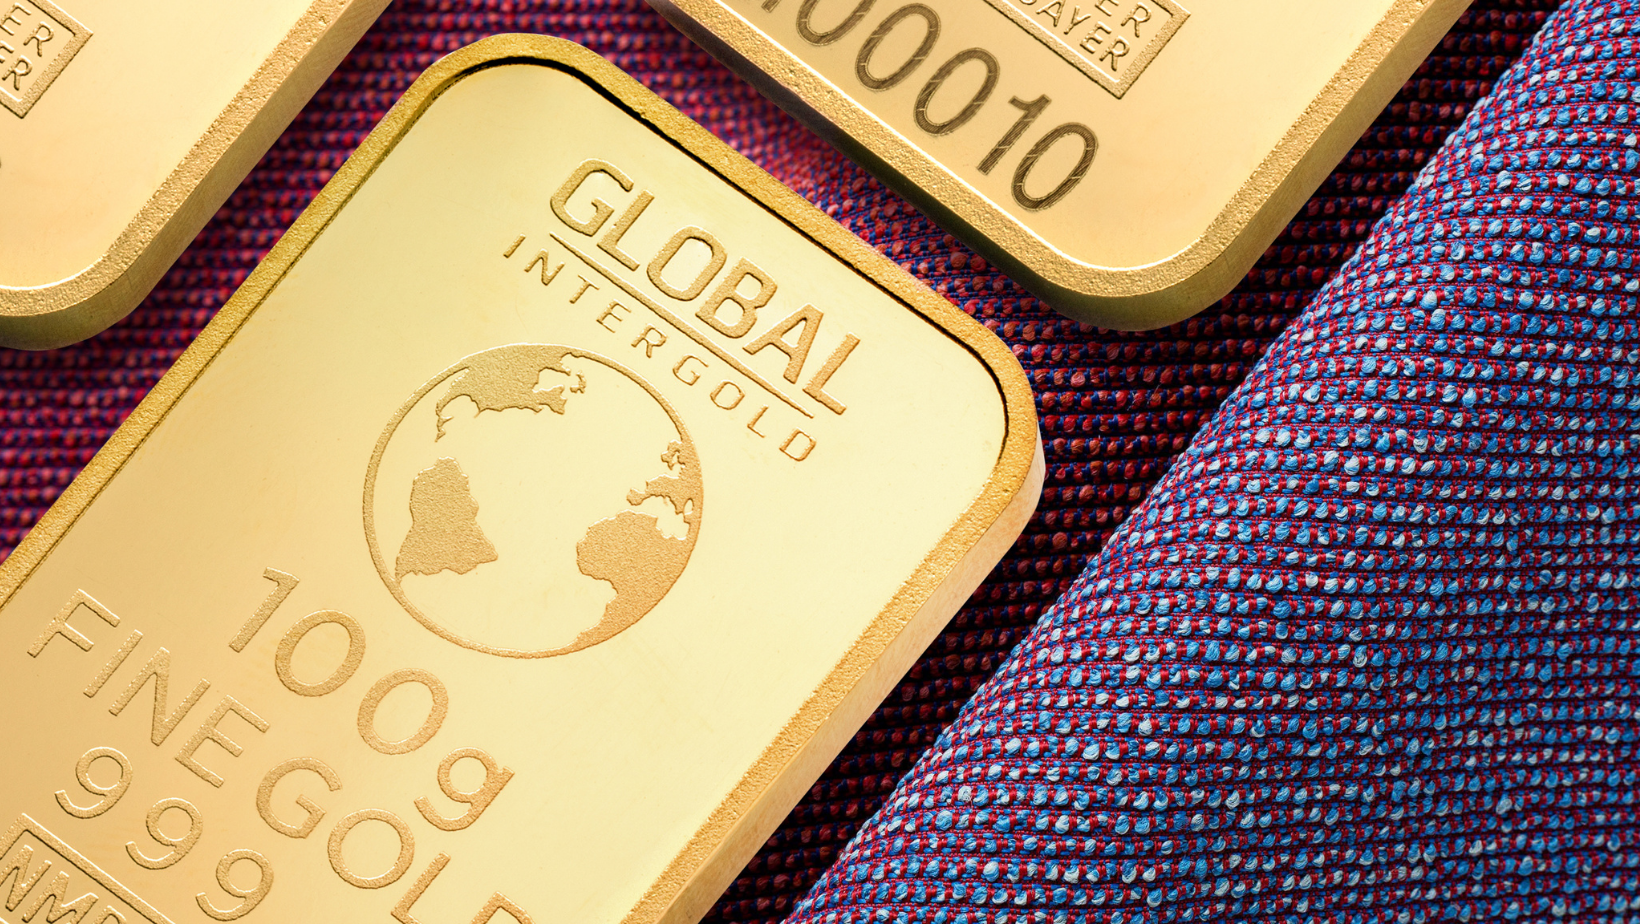 Gold IRA Companies: A Comparison of the Best Options